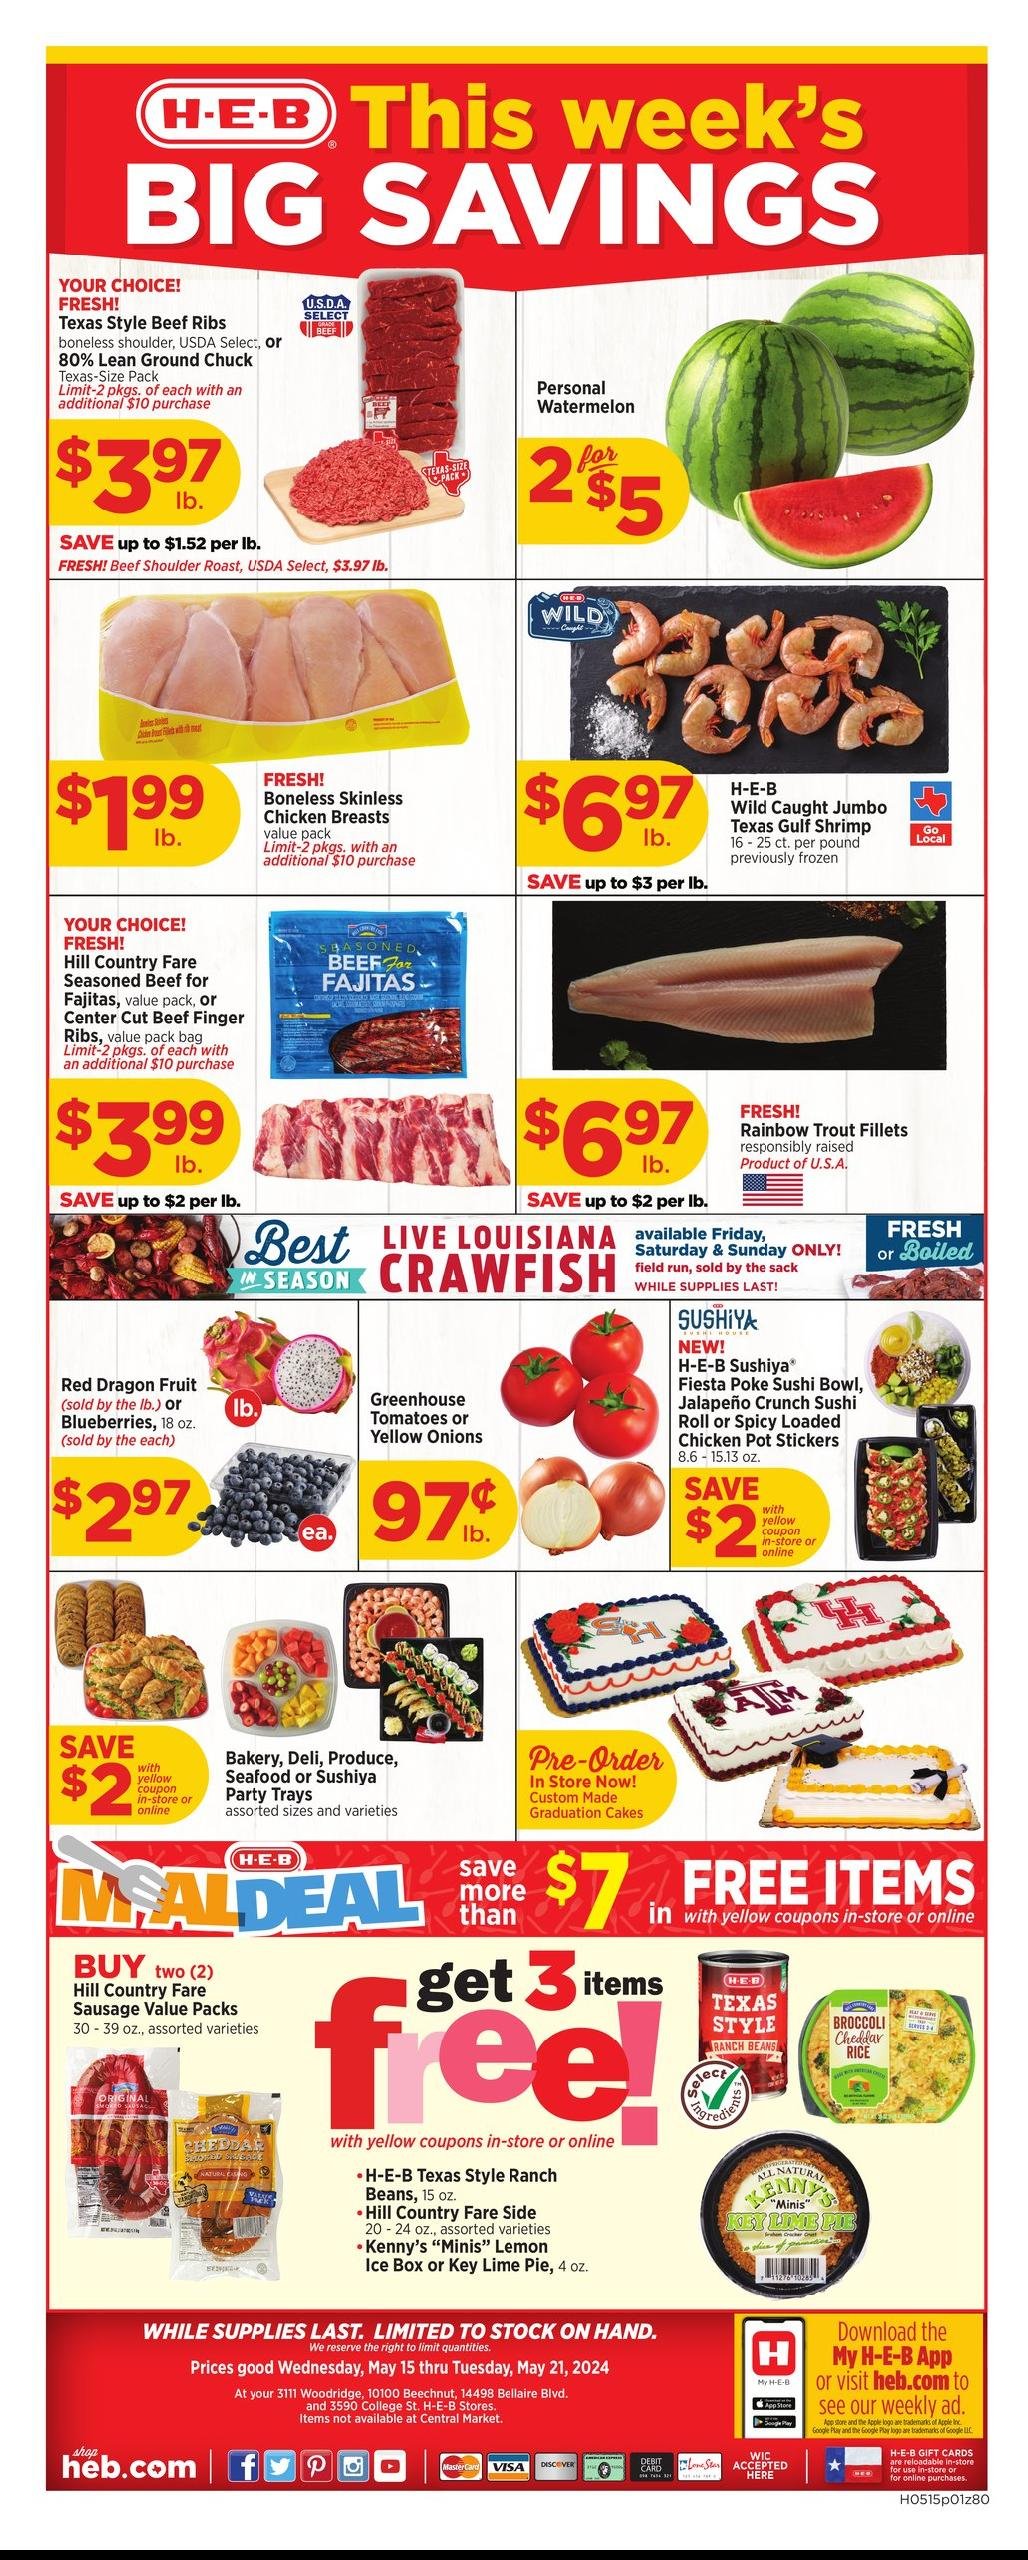 HEB weekly ad - page 1